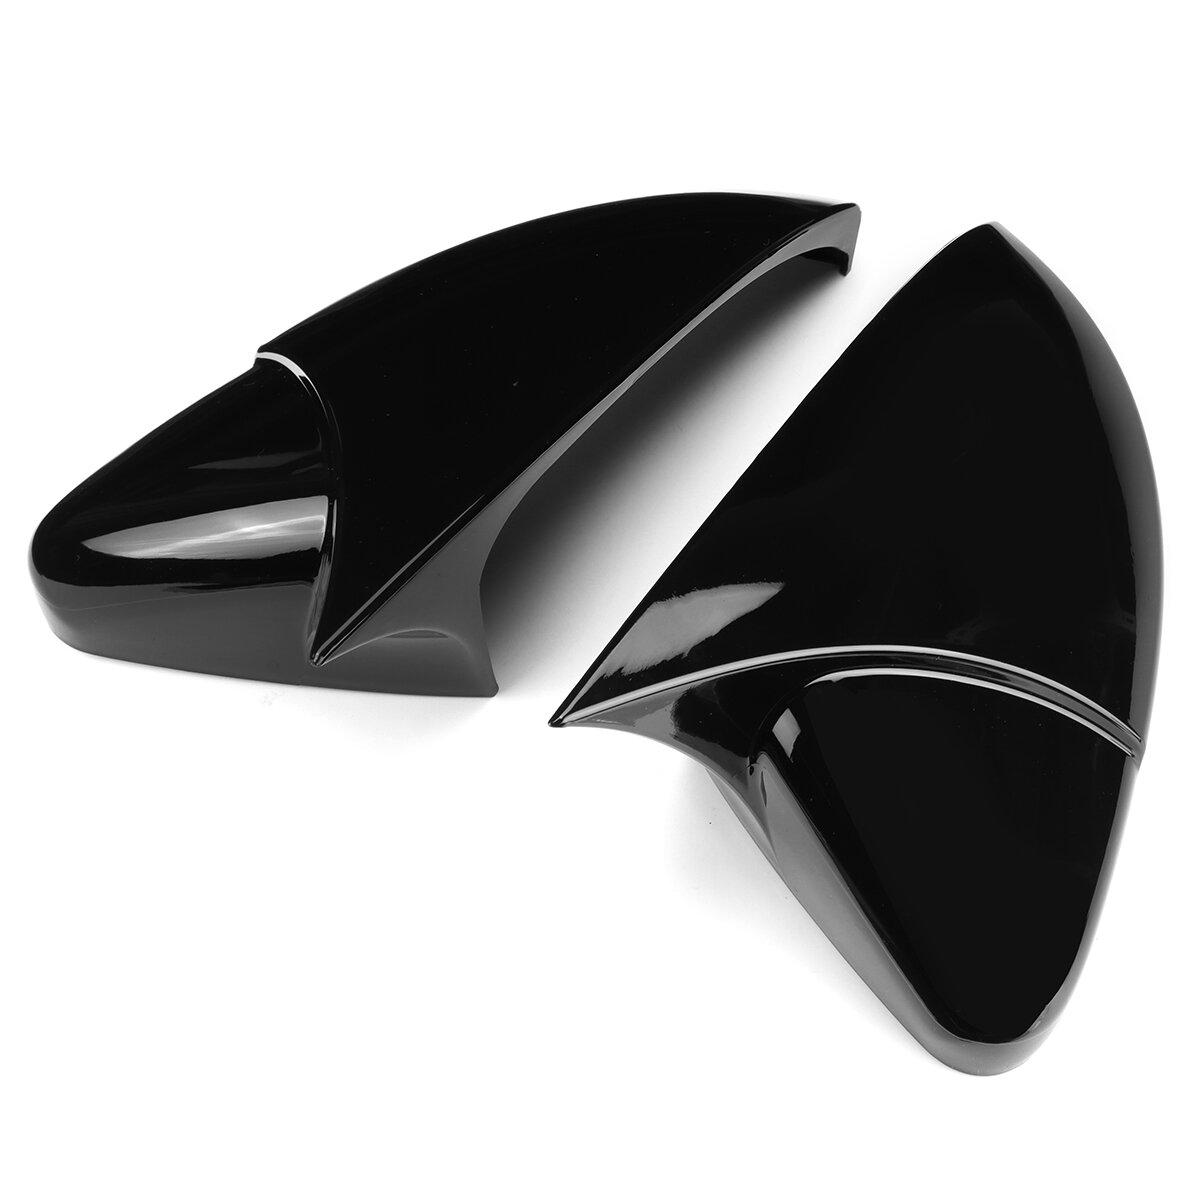 

Mirror Cover Upgrade - Enhance Your Ride with Horned Mirrors for Volkswagen Golf MK7 MK7.5 GTI GTD R